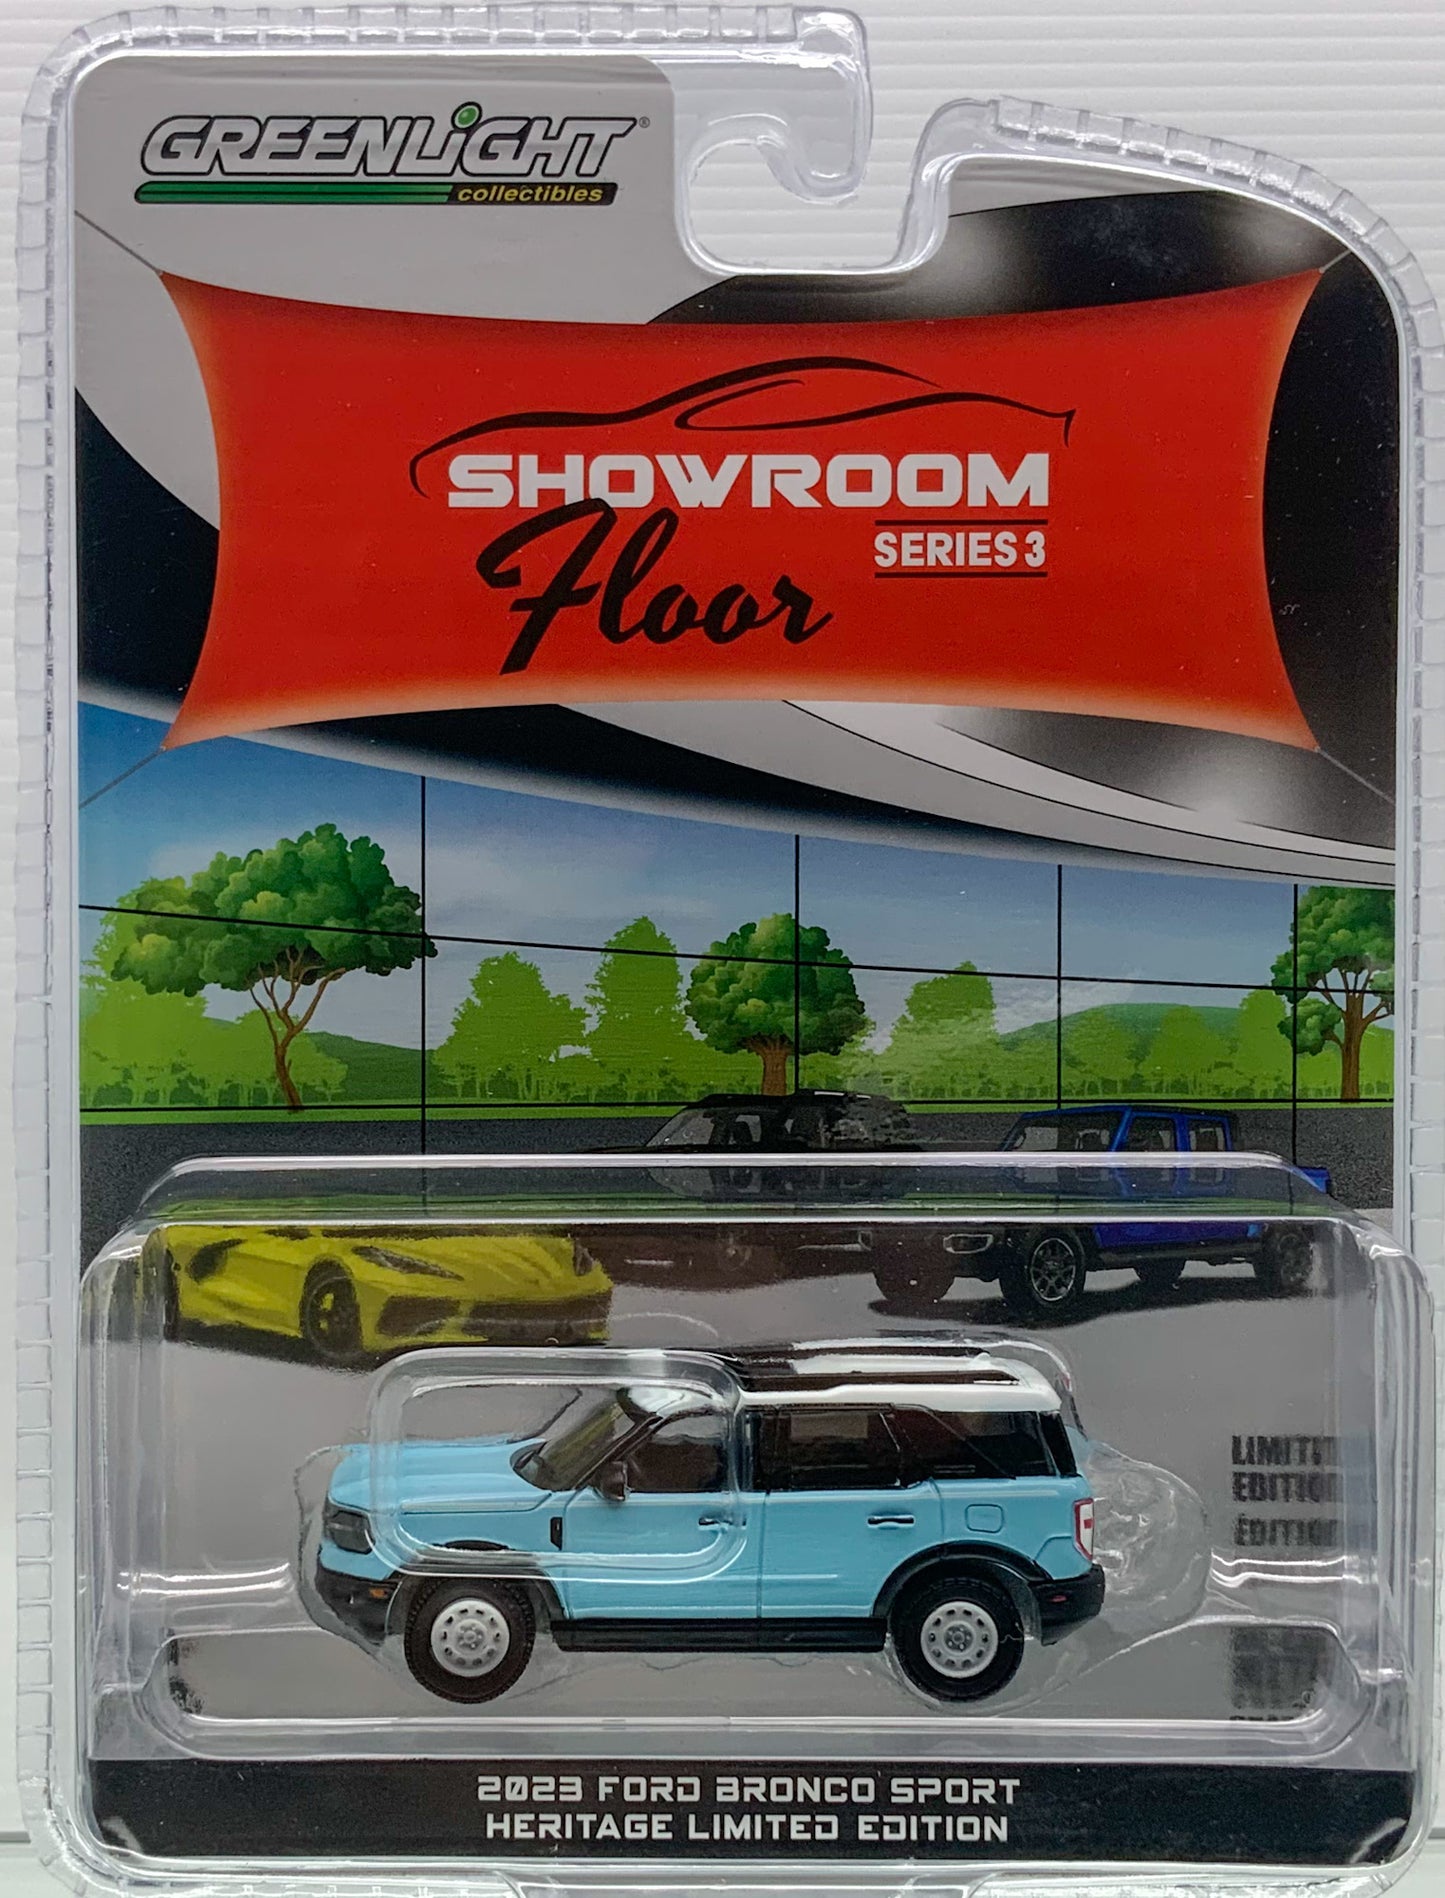 Greenlight 1:64 Showroom Floor Series 3 2023 Ford Bronco Sport Heritage Limited Edition